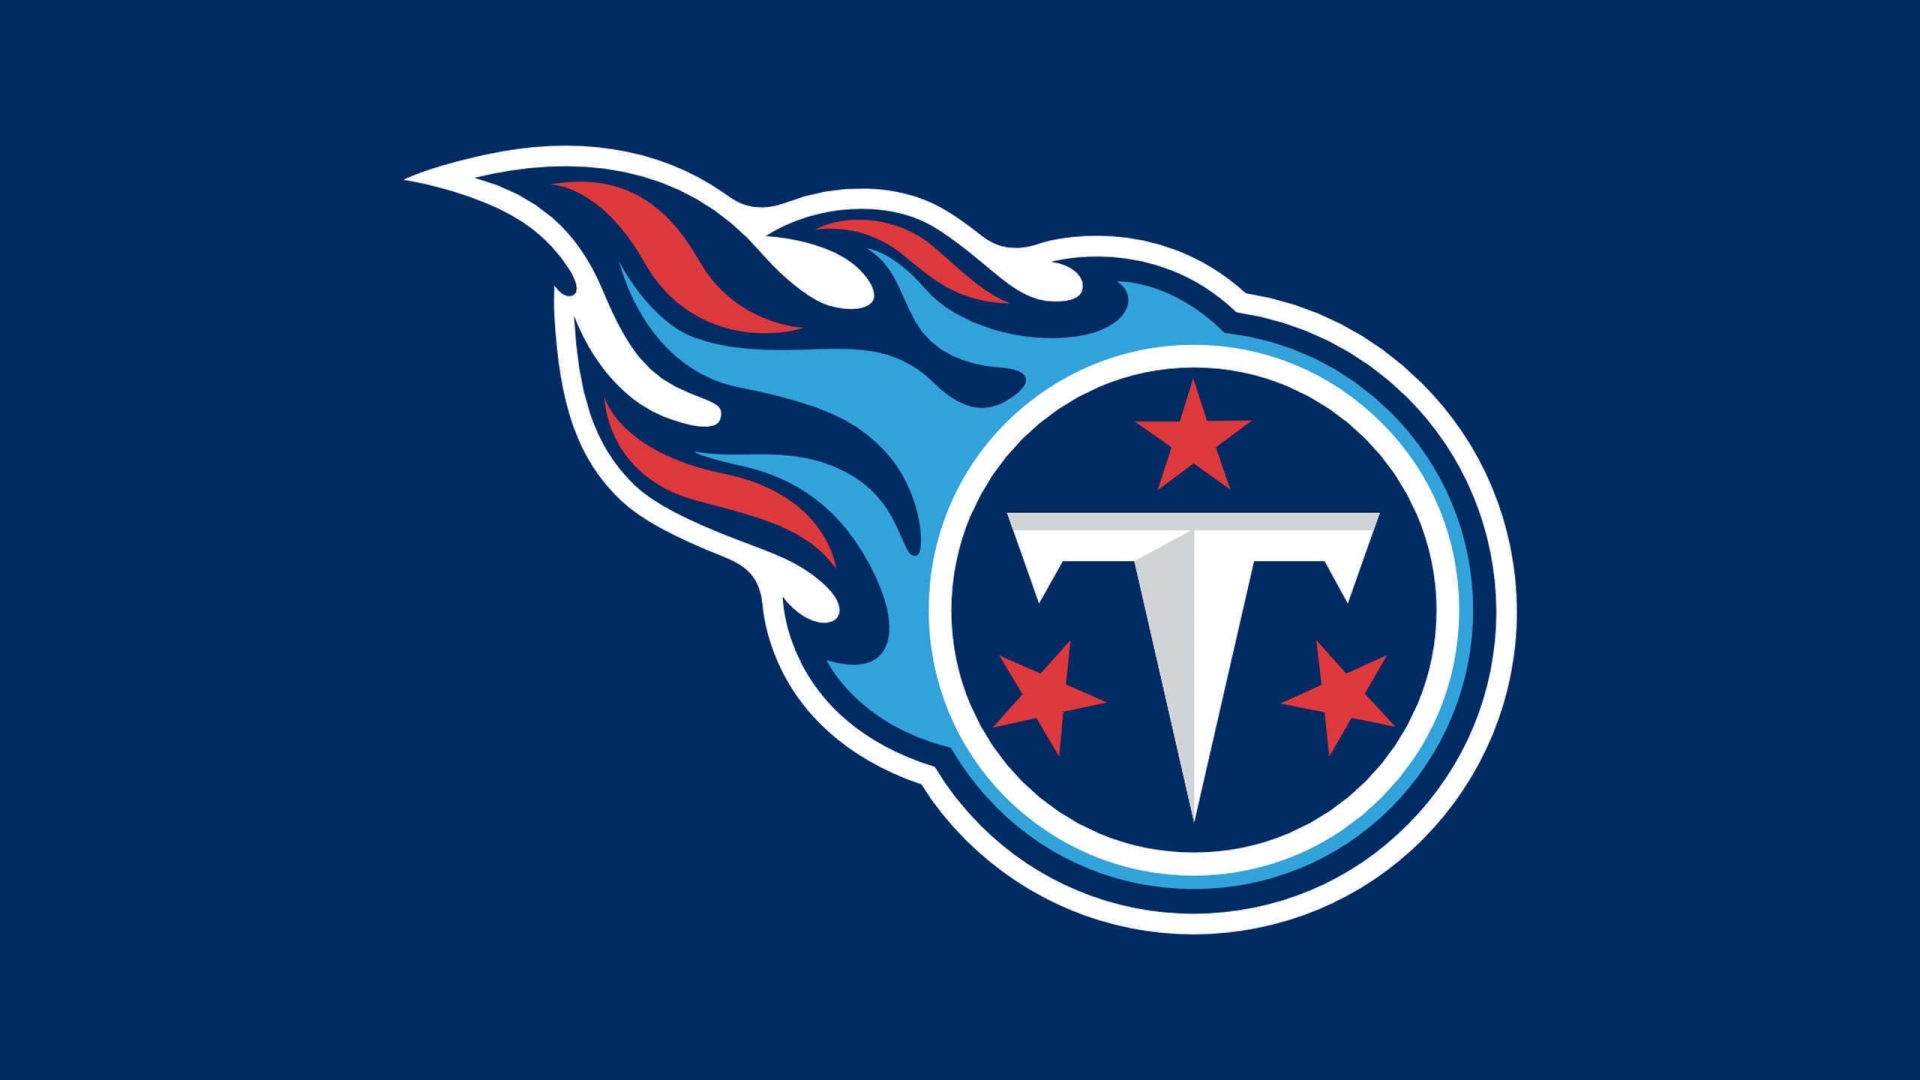 Tennessee Titans Logo for 1920 x 1080 HDTV 1080p resolution